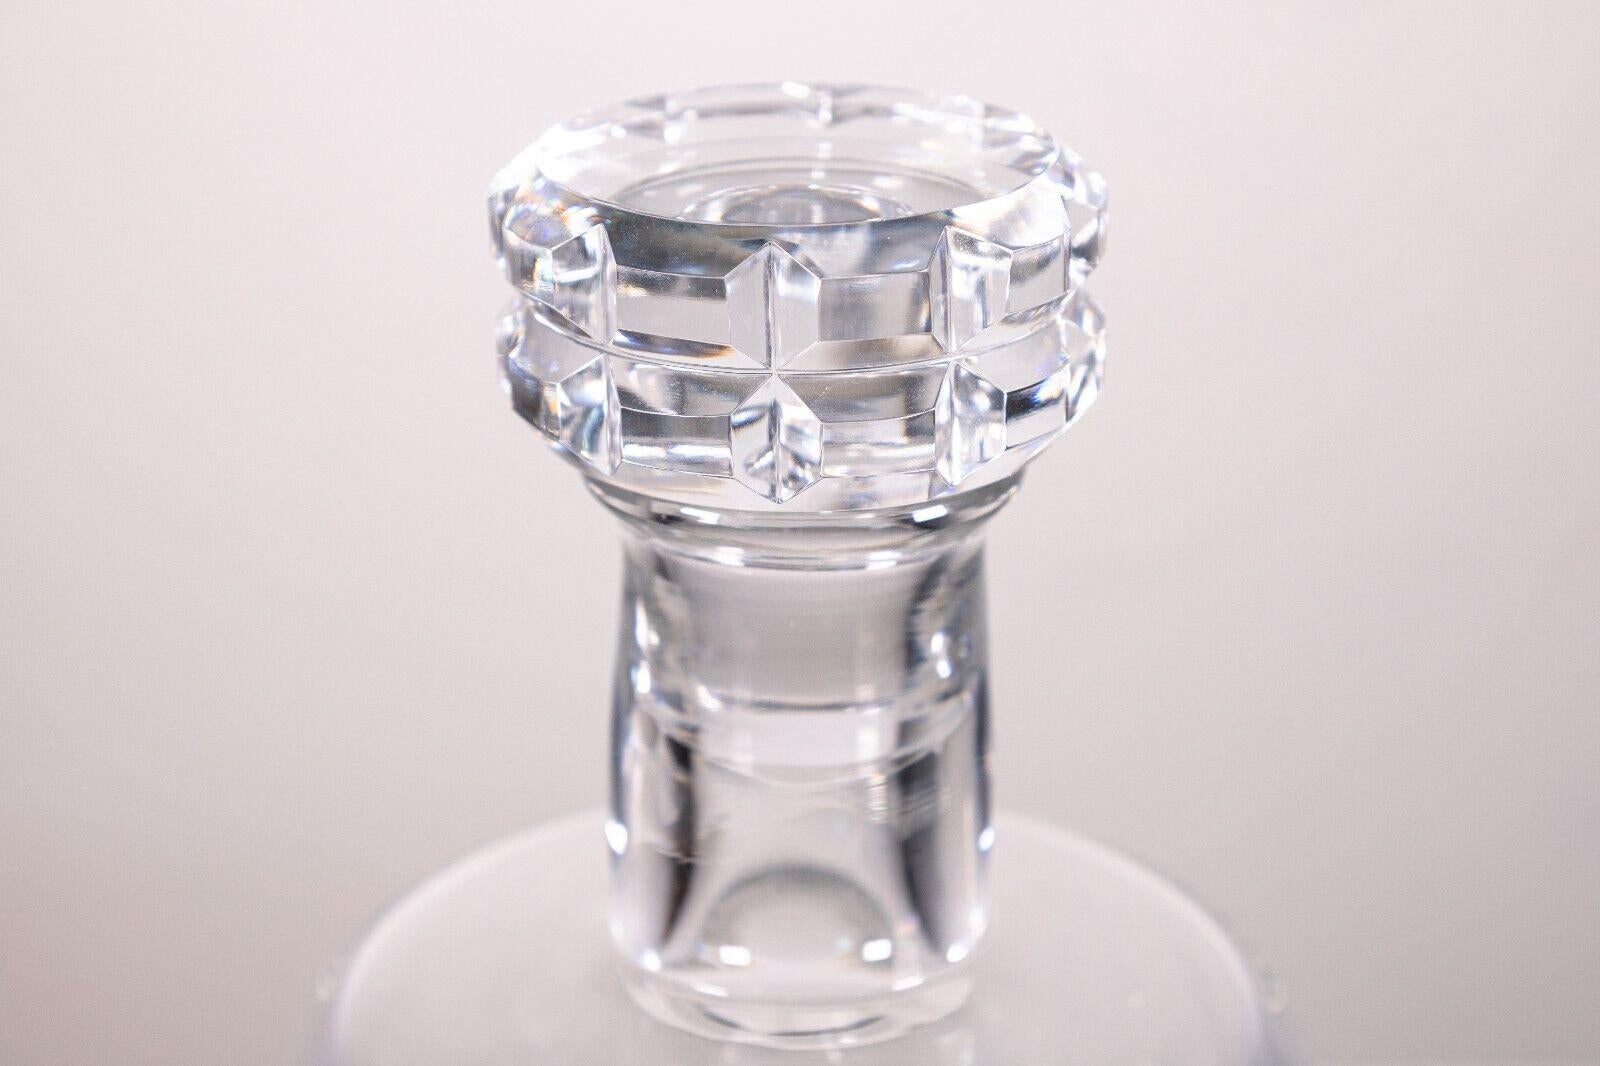 A Baccarat French crystal decanter. An absolutely stunning crystal decanter from French manufacturer Baccarat. This piece is a perfect addition to any bar, kitchen, or dining space. The design and construction of this piece is immaculate. This piece